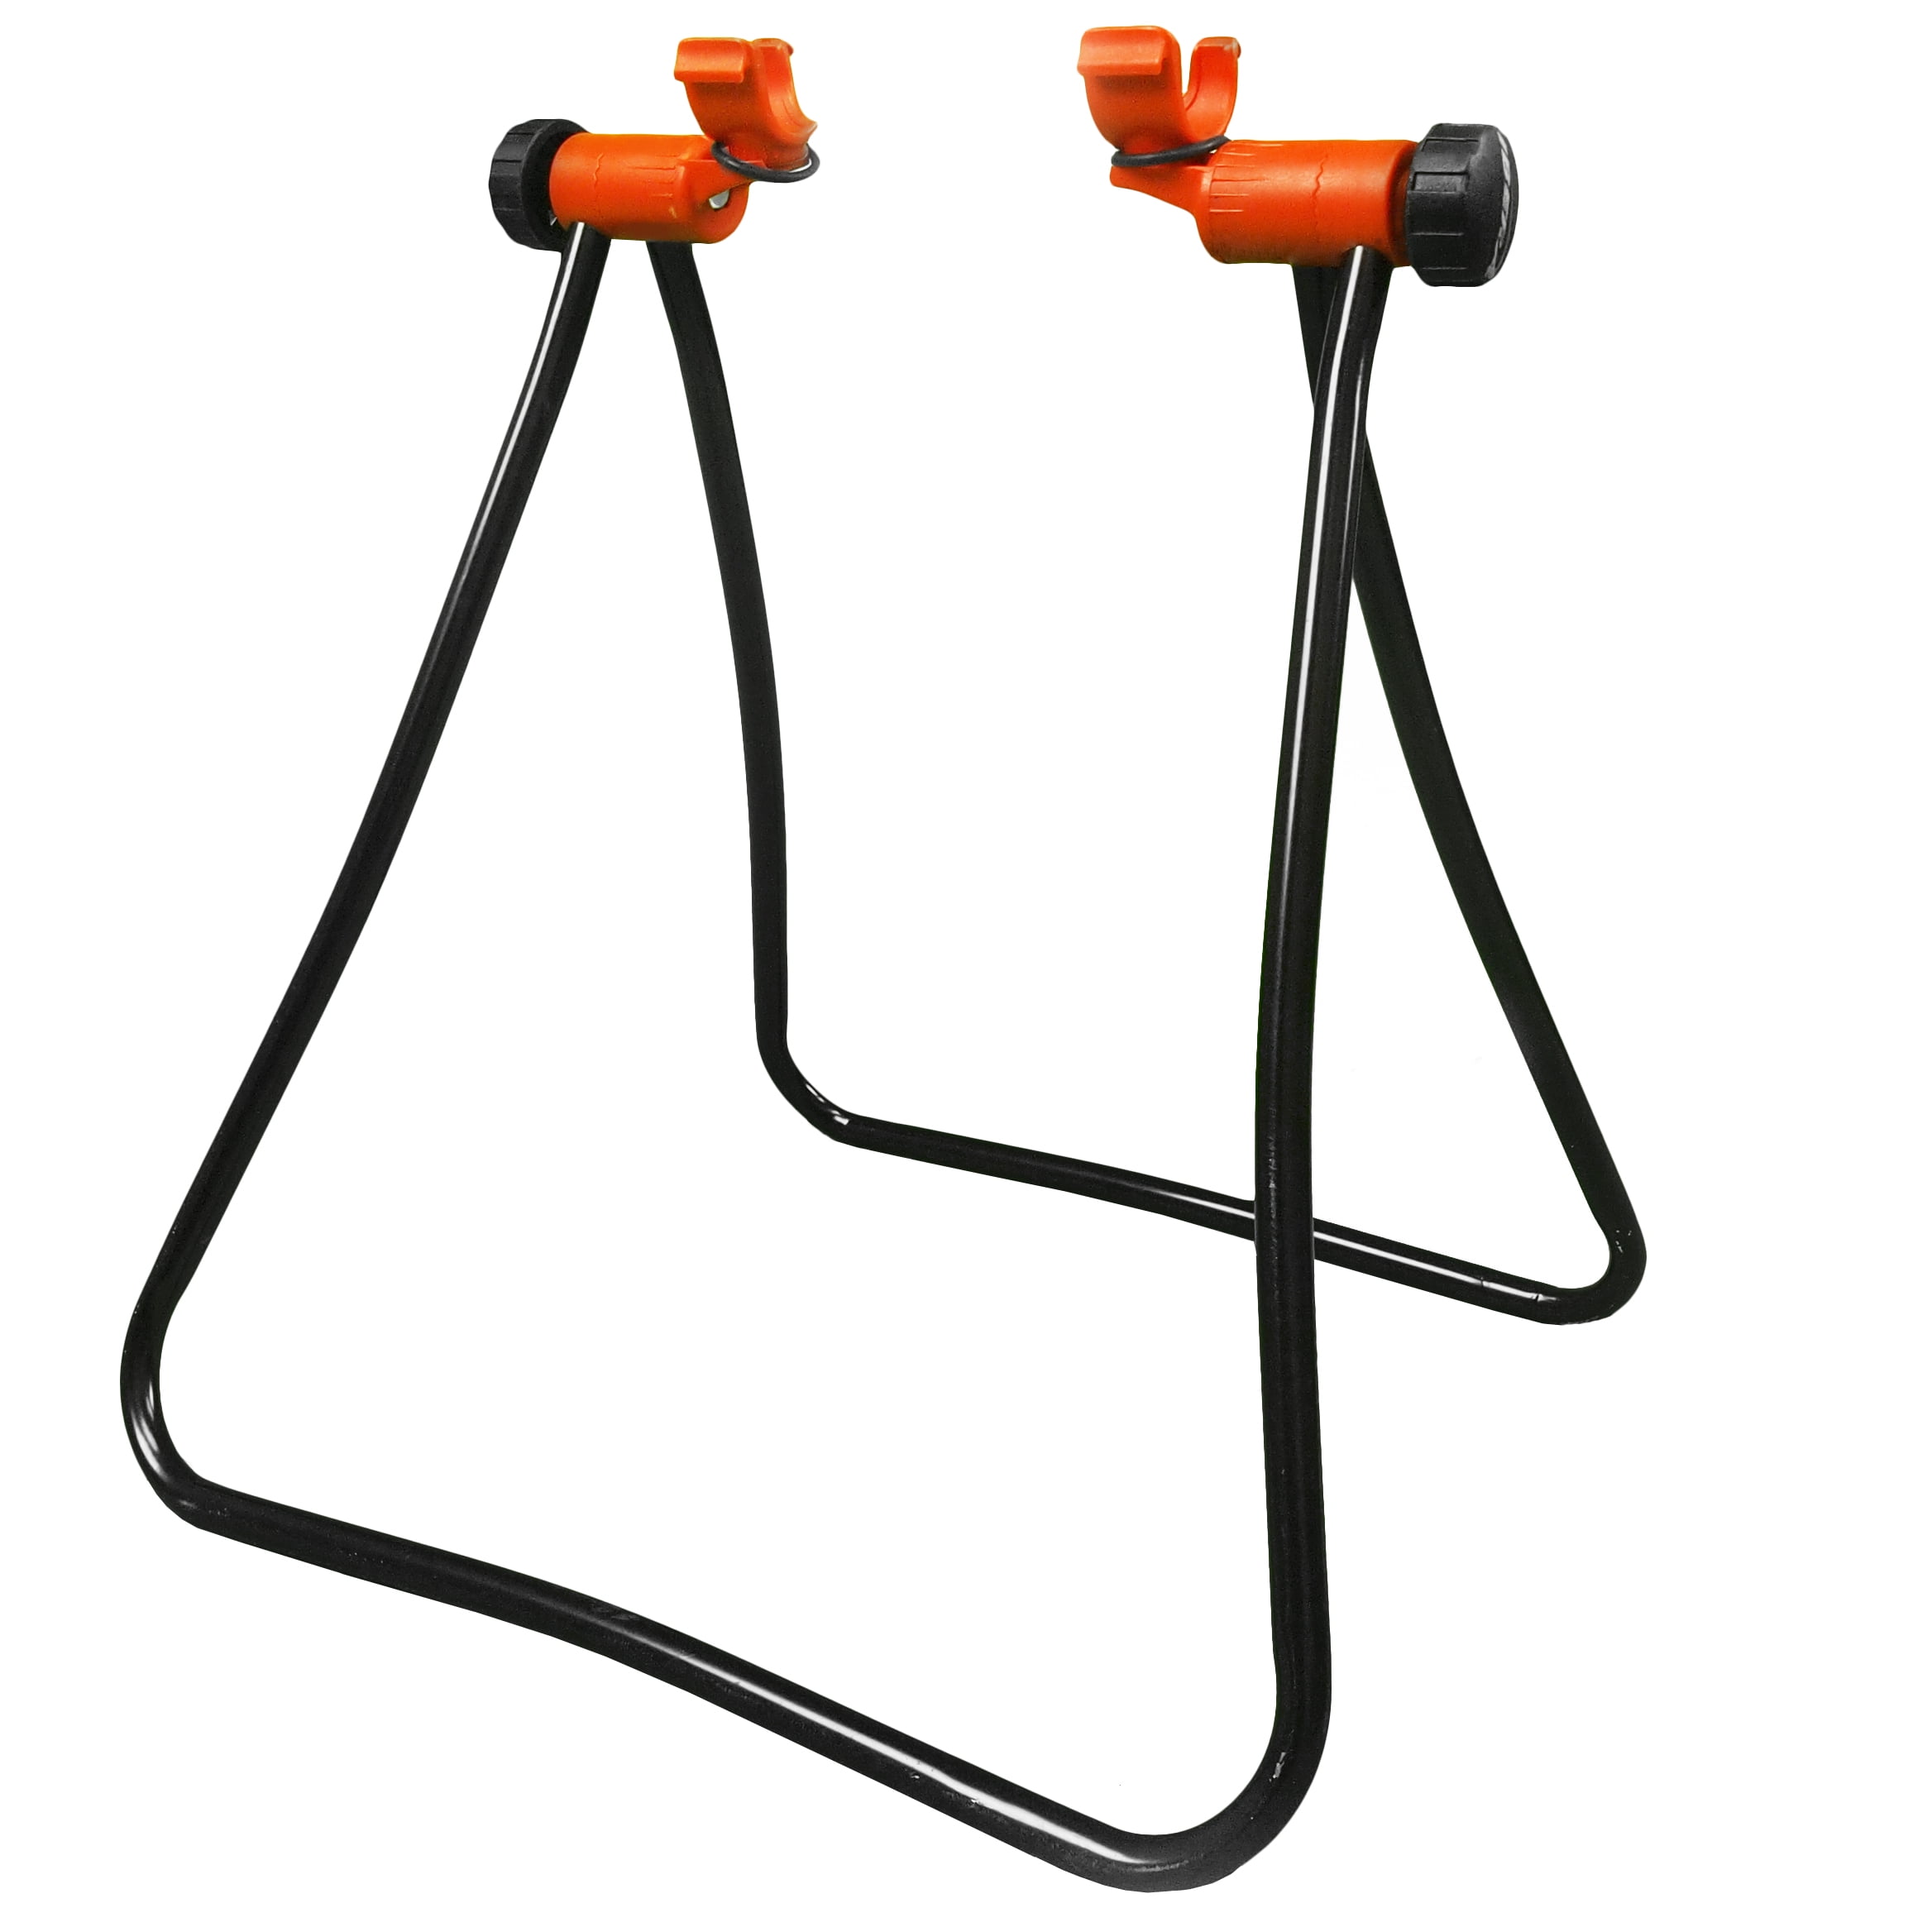 Ibera Easy Utility Bicycle Stand Adjustable Height Foldable Mechanic Repair 